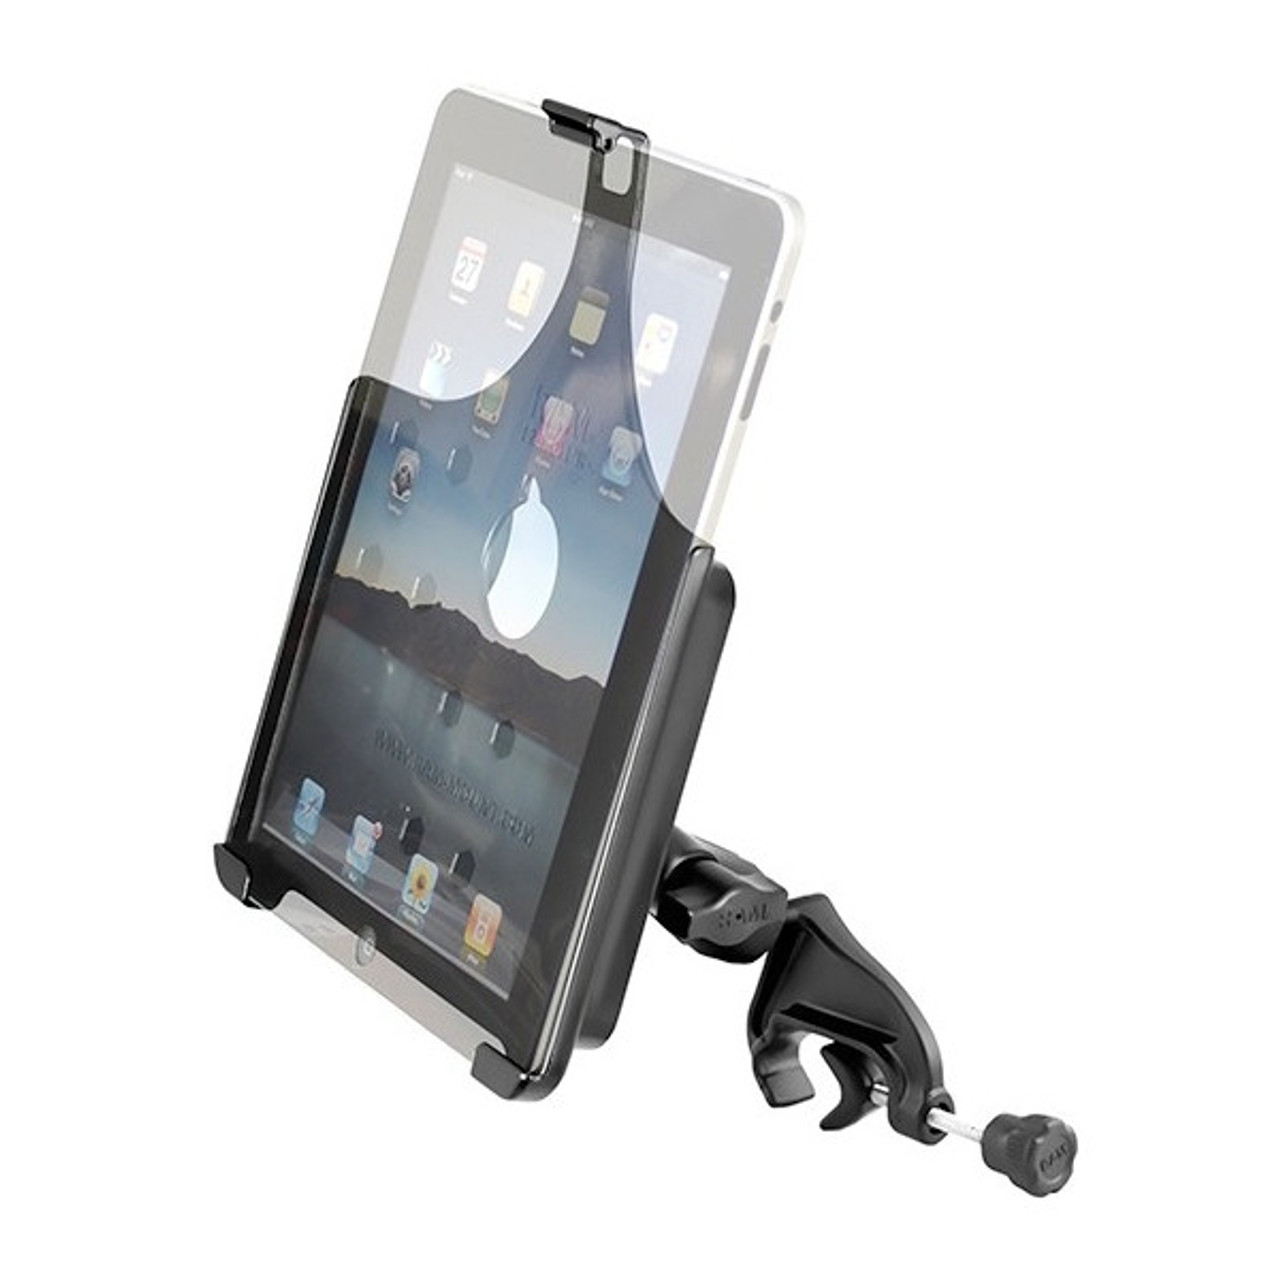 Handsfree Book Seat Book Tablet and iPad Holder